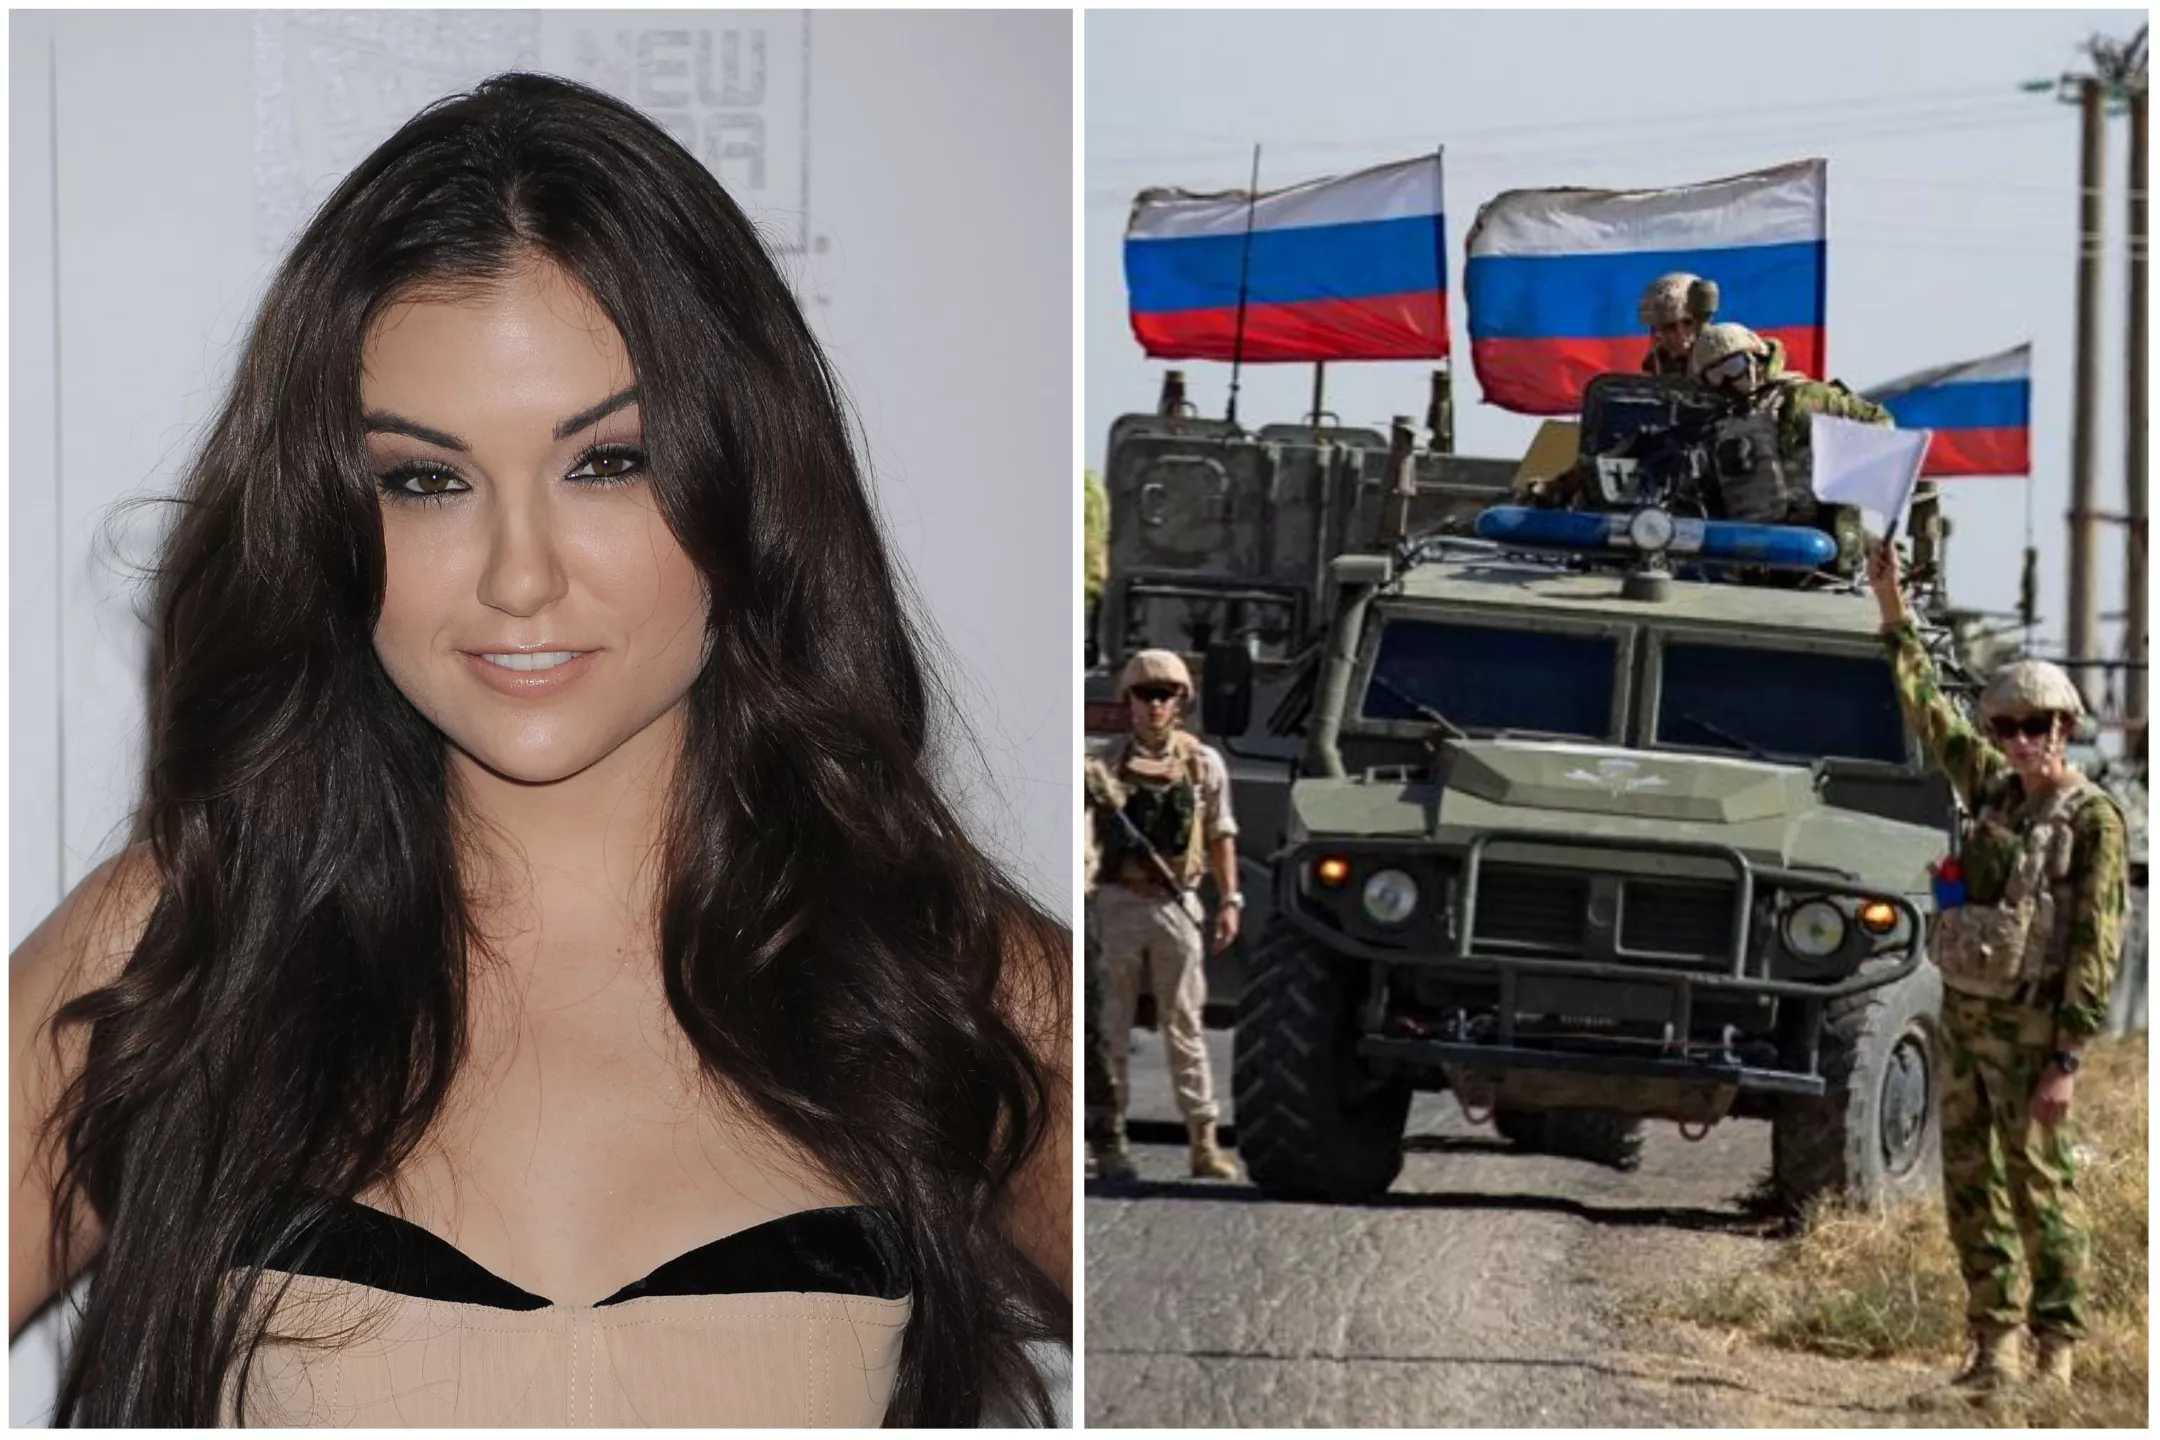 Fact Check Was Ex-Adult Film Star Sasha Grey in Russian Military Promo? photo picture photo